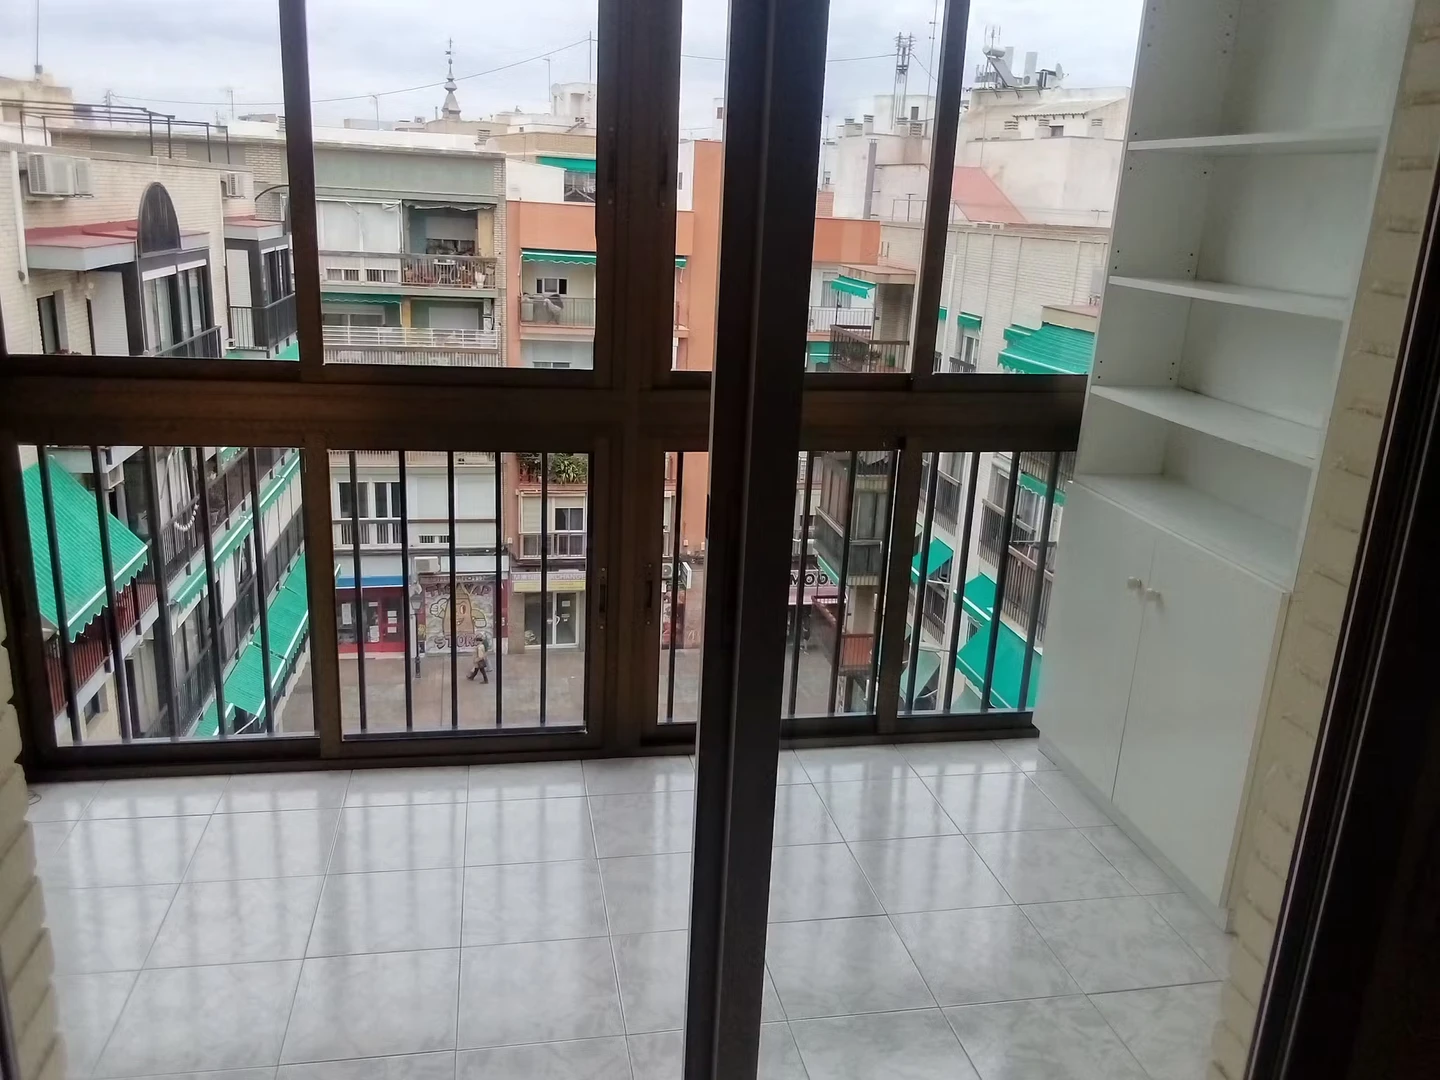 Room for rent with double bed Murcia